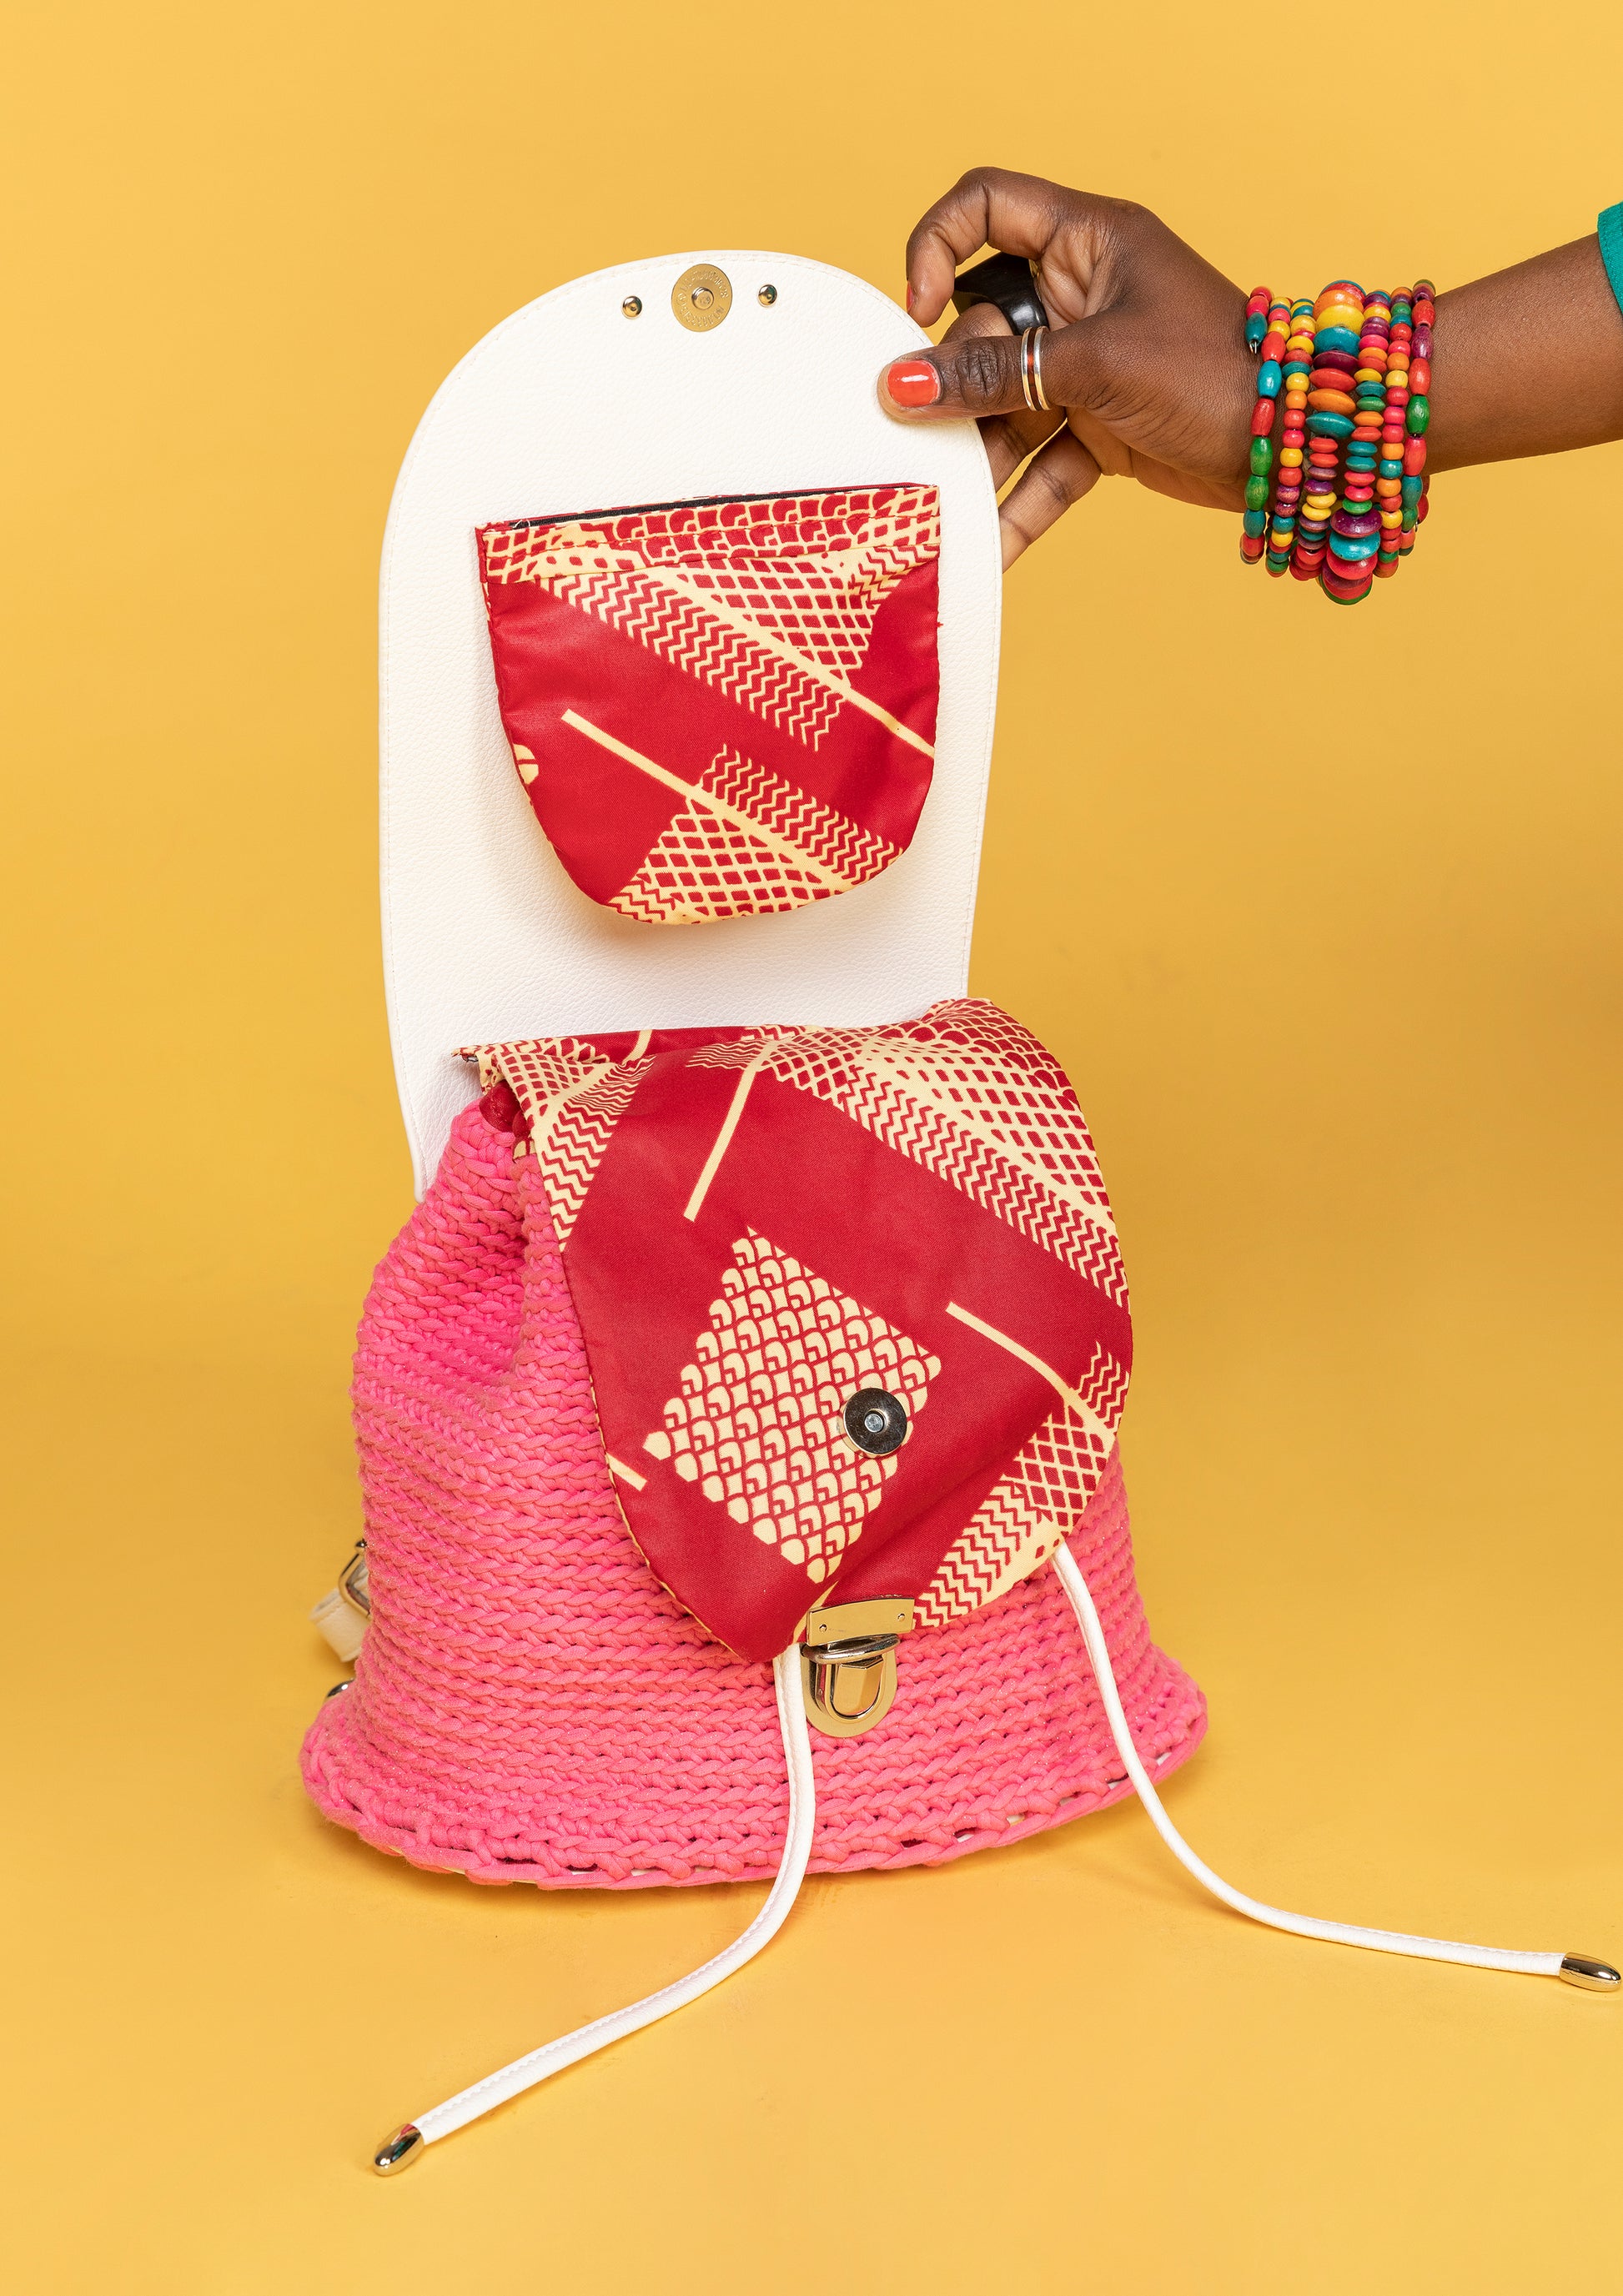 crocheted, pink and white bag, with an African style print, opened and showing part of the interior